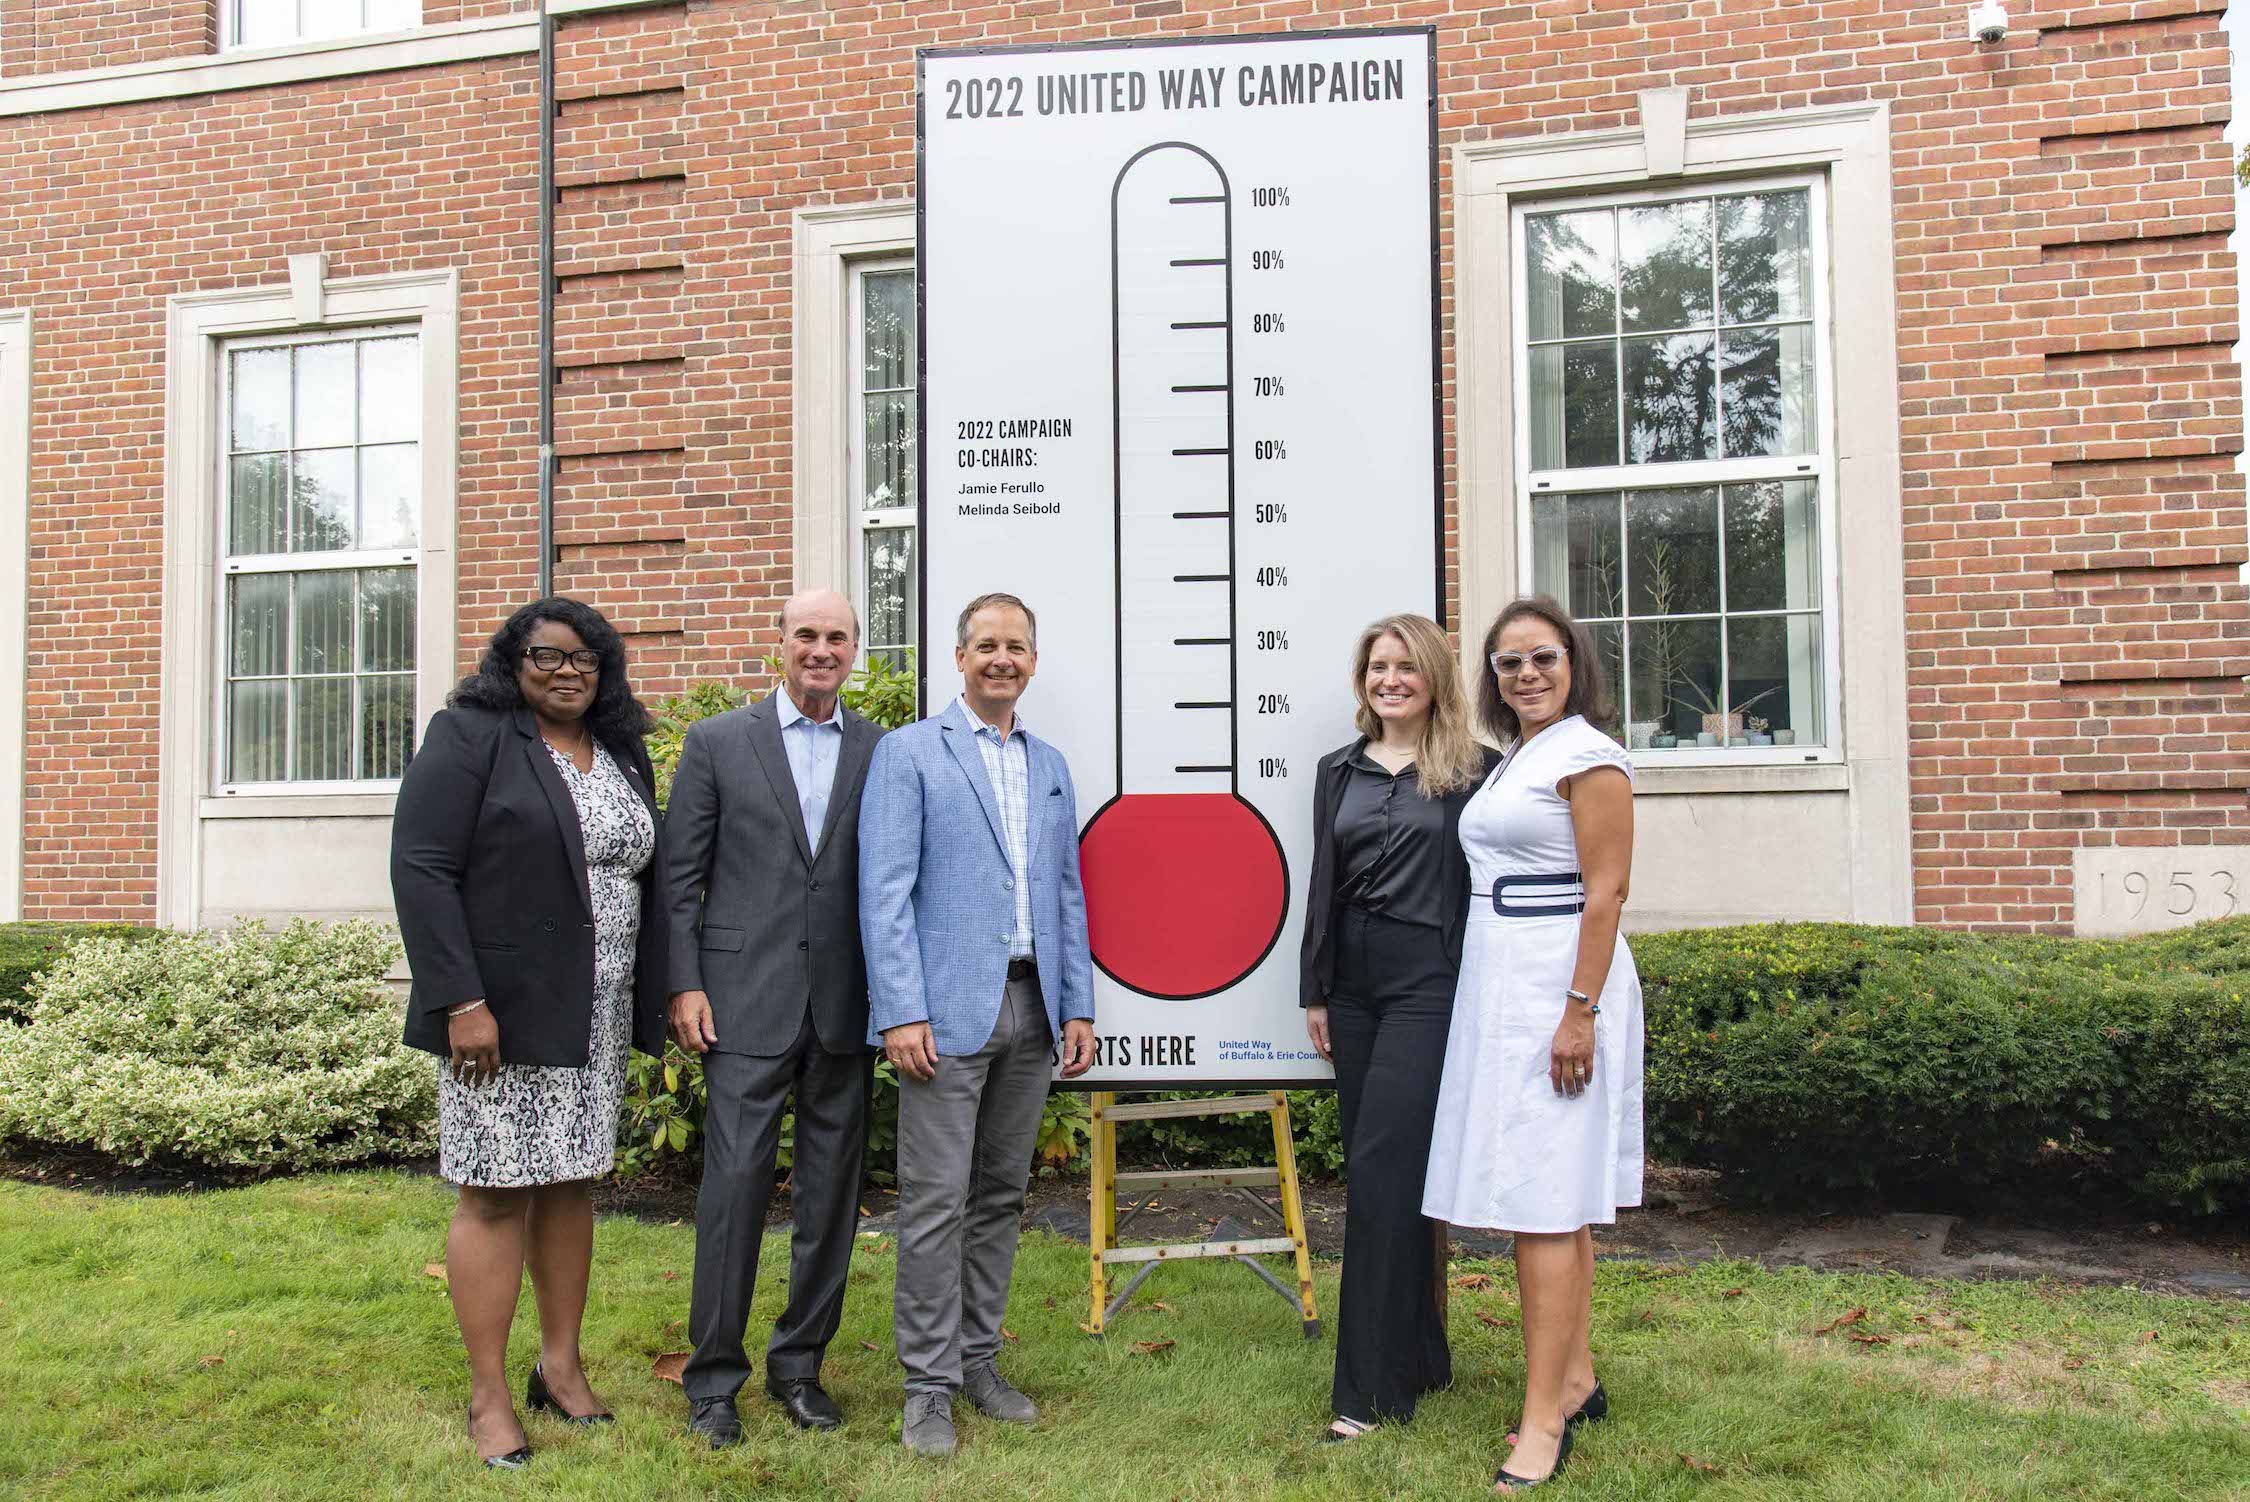 Pictured: UWBEC Chief Operating Officer Trina Burruss, UWBEC President and CEO Michael Weiner, 2022 UW campaign co-chair Jamie Ferullo, 2022 UW campaign co-chair Mindy Seibold, and UWBEC Board Chair the Rev. Rachelle Sat'chell Robinson. (Image courtesy of United Way of Buffalo & Erie County)